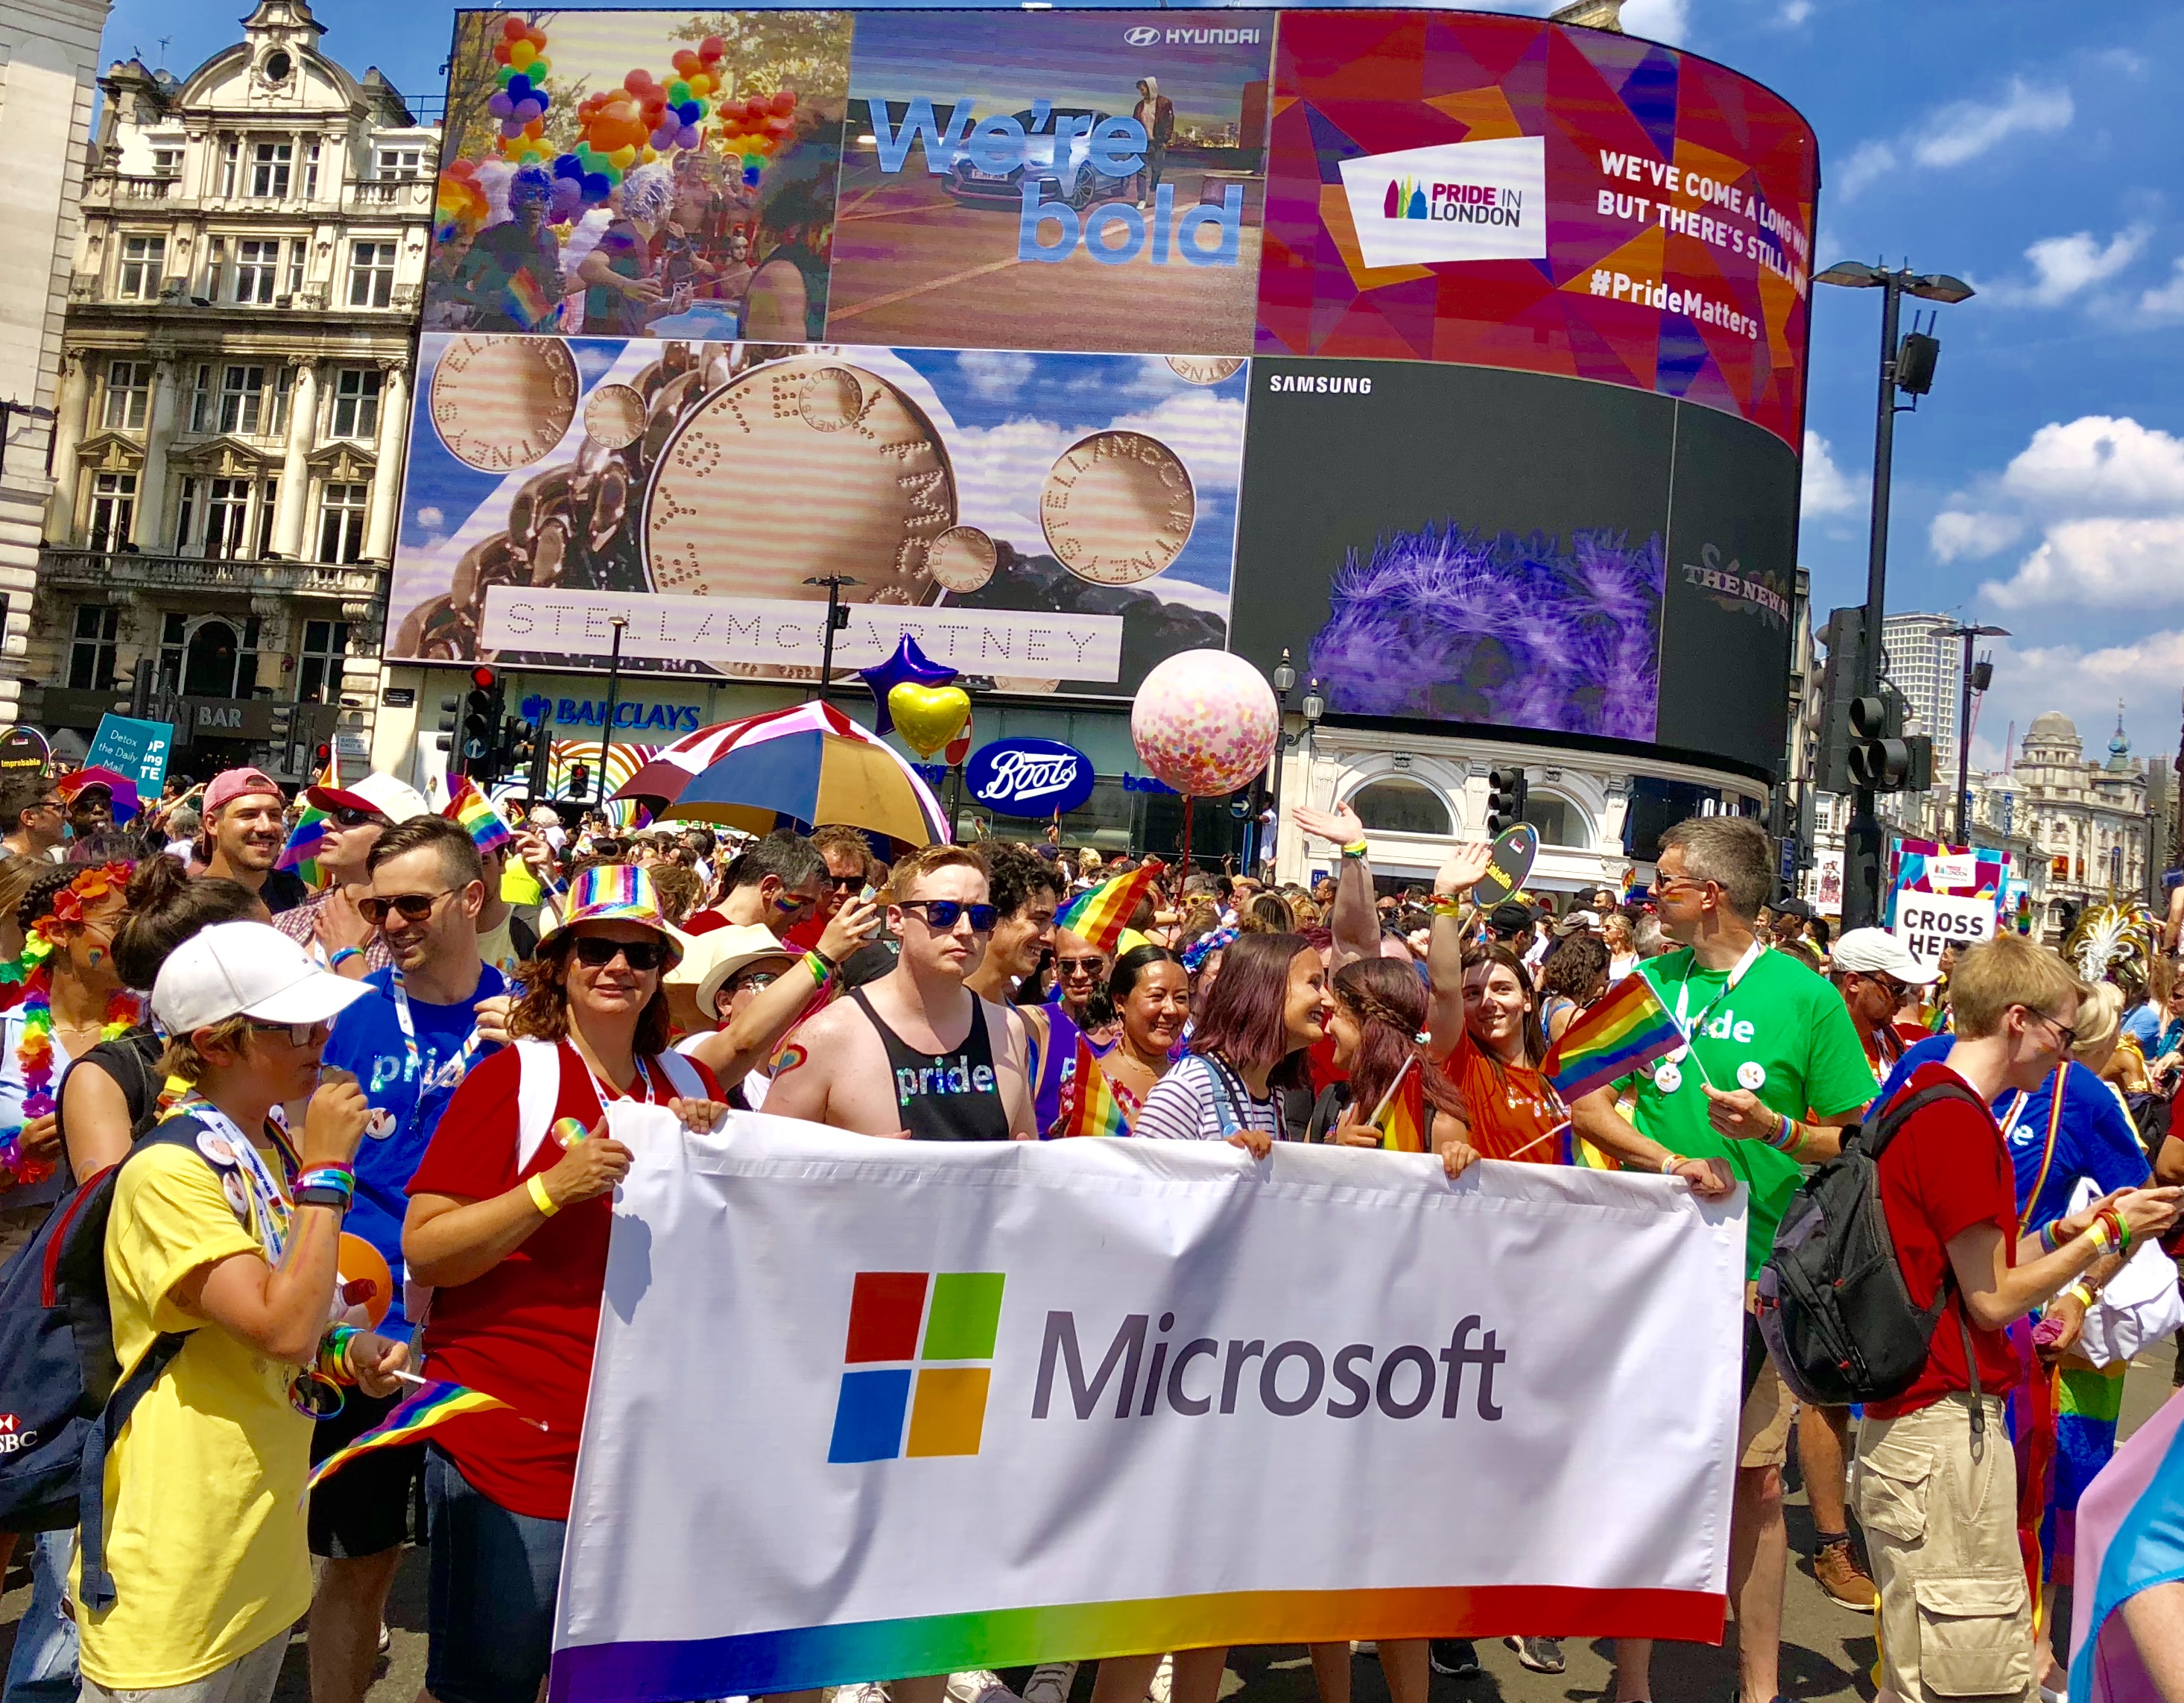 Microsoft staff at the Pride in London march 2018